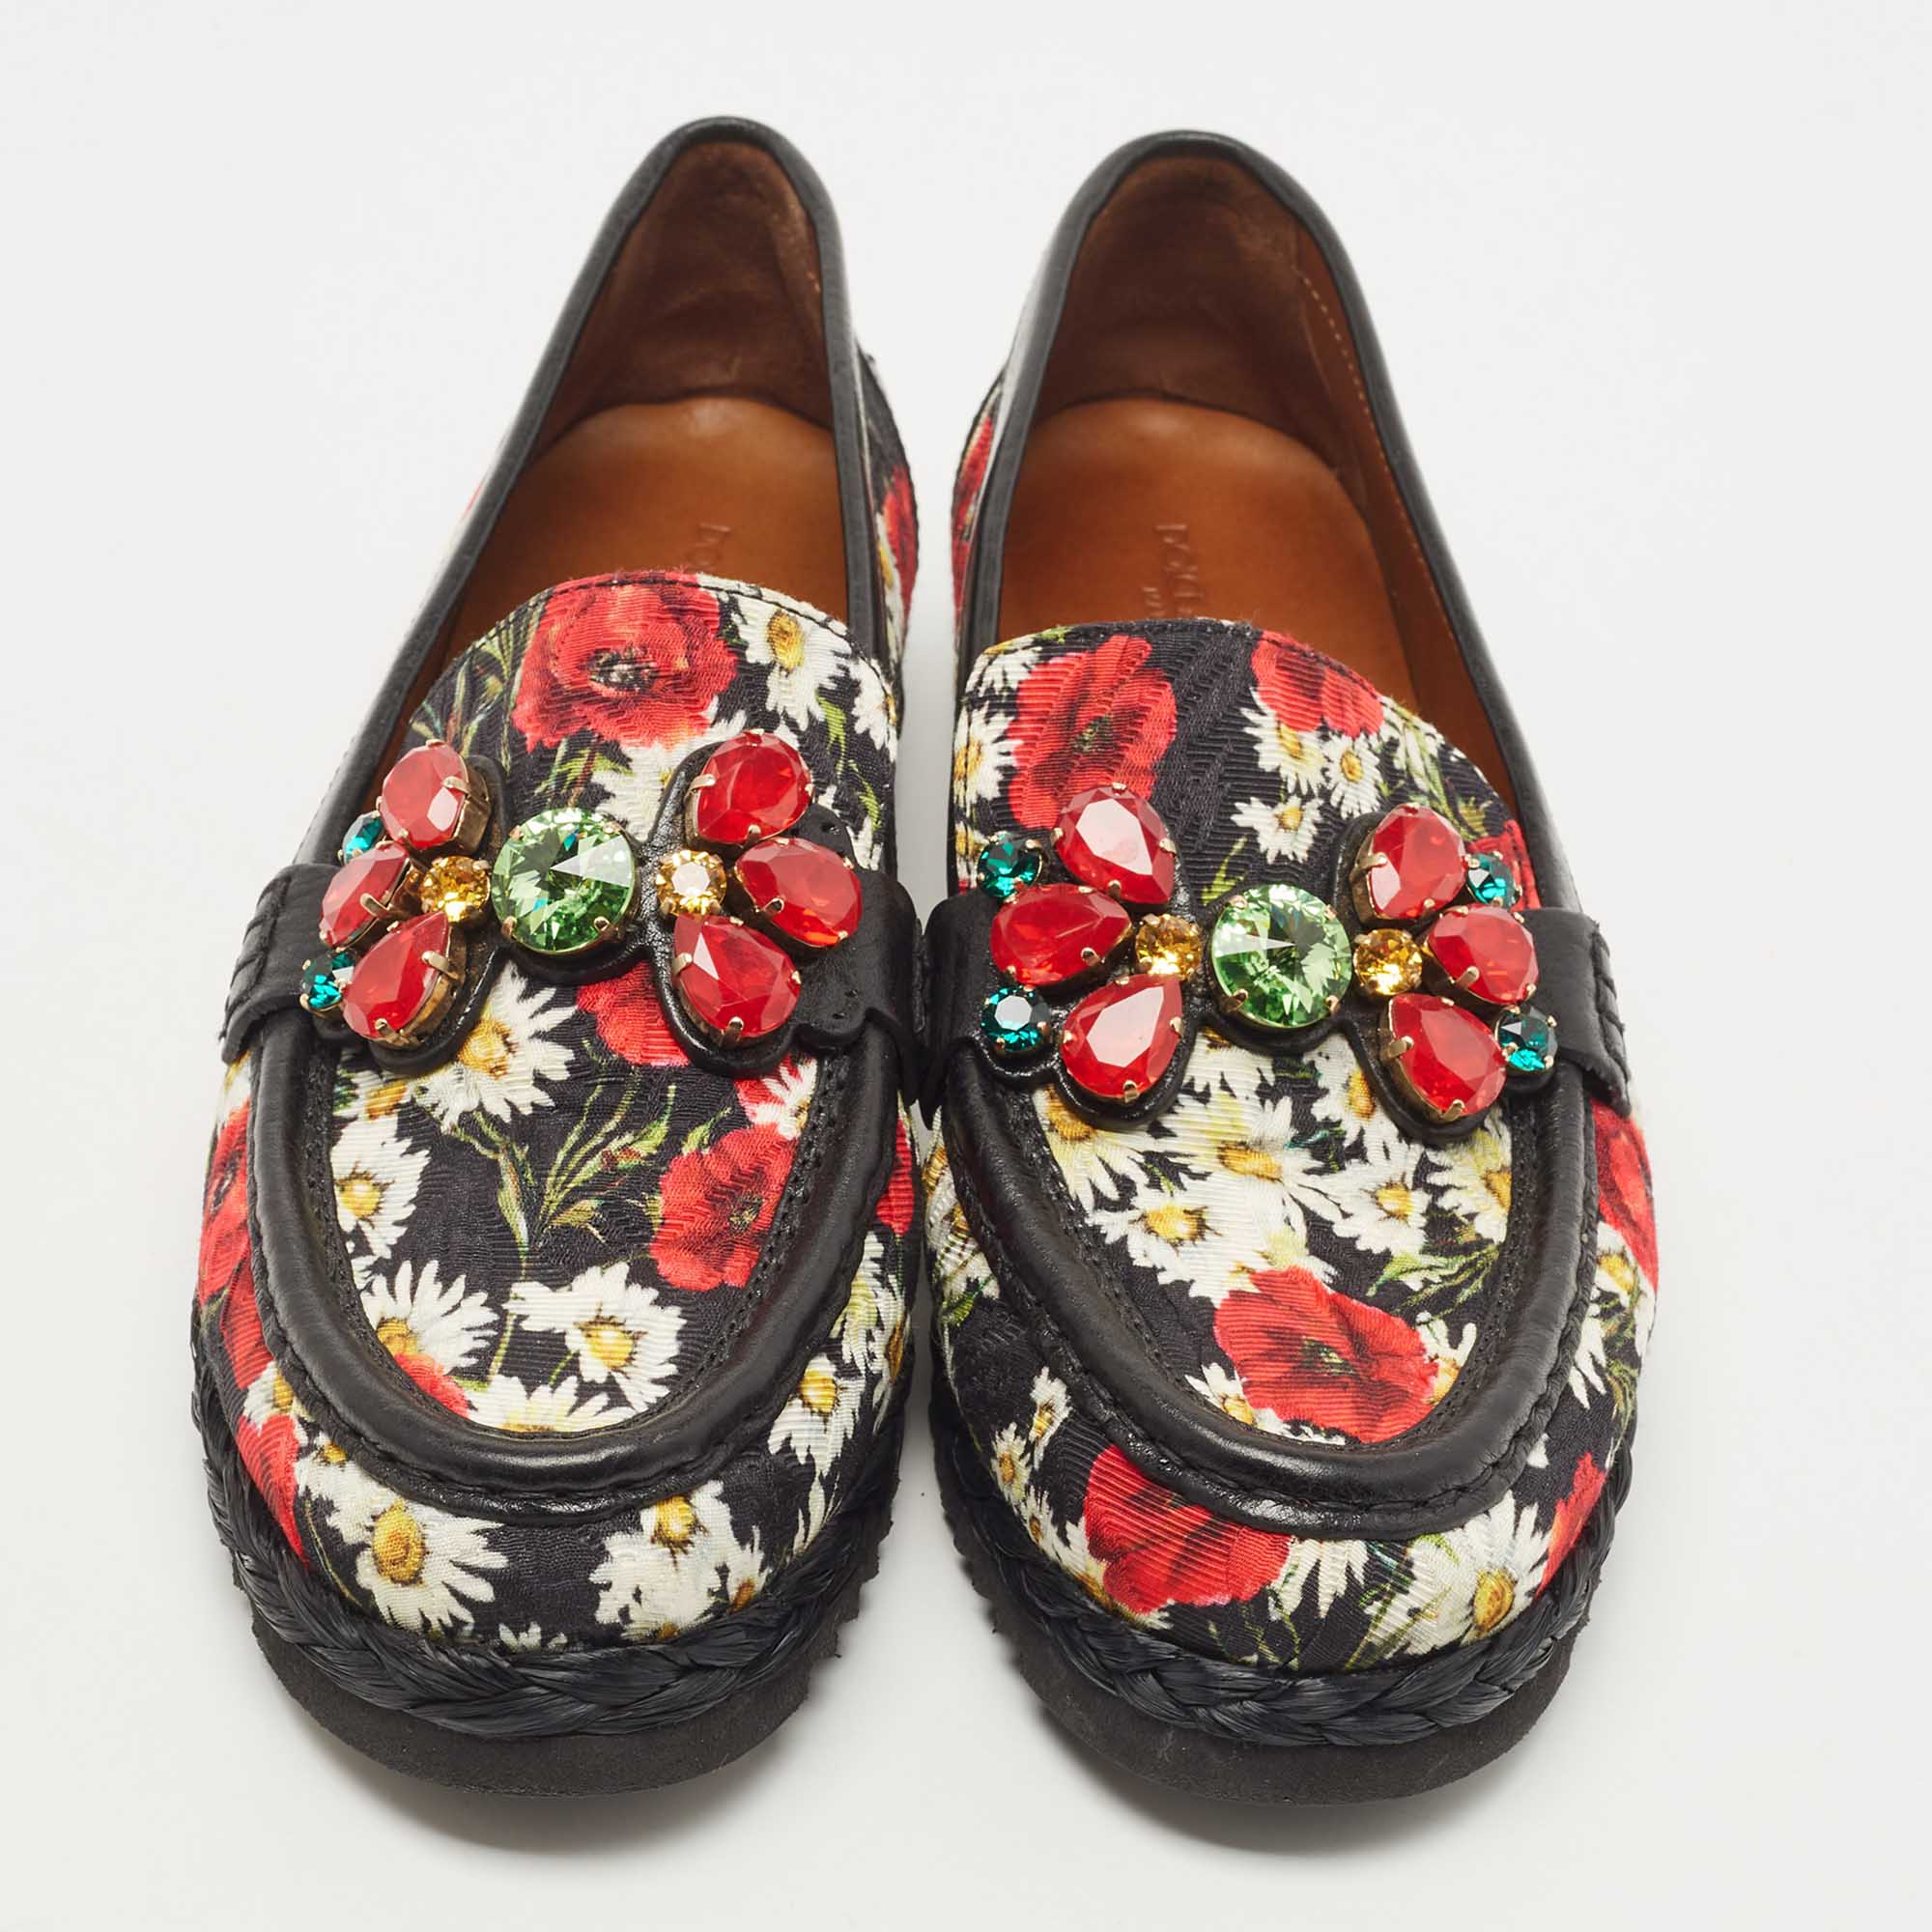 Dolce & Gabbana Multicolor Floral Fabric And Leather Crystal Embellished Loafers Size 39